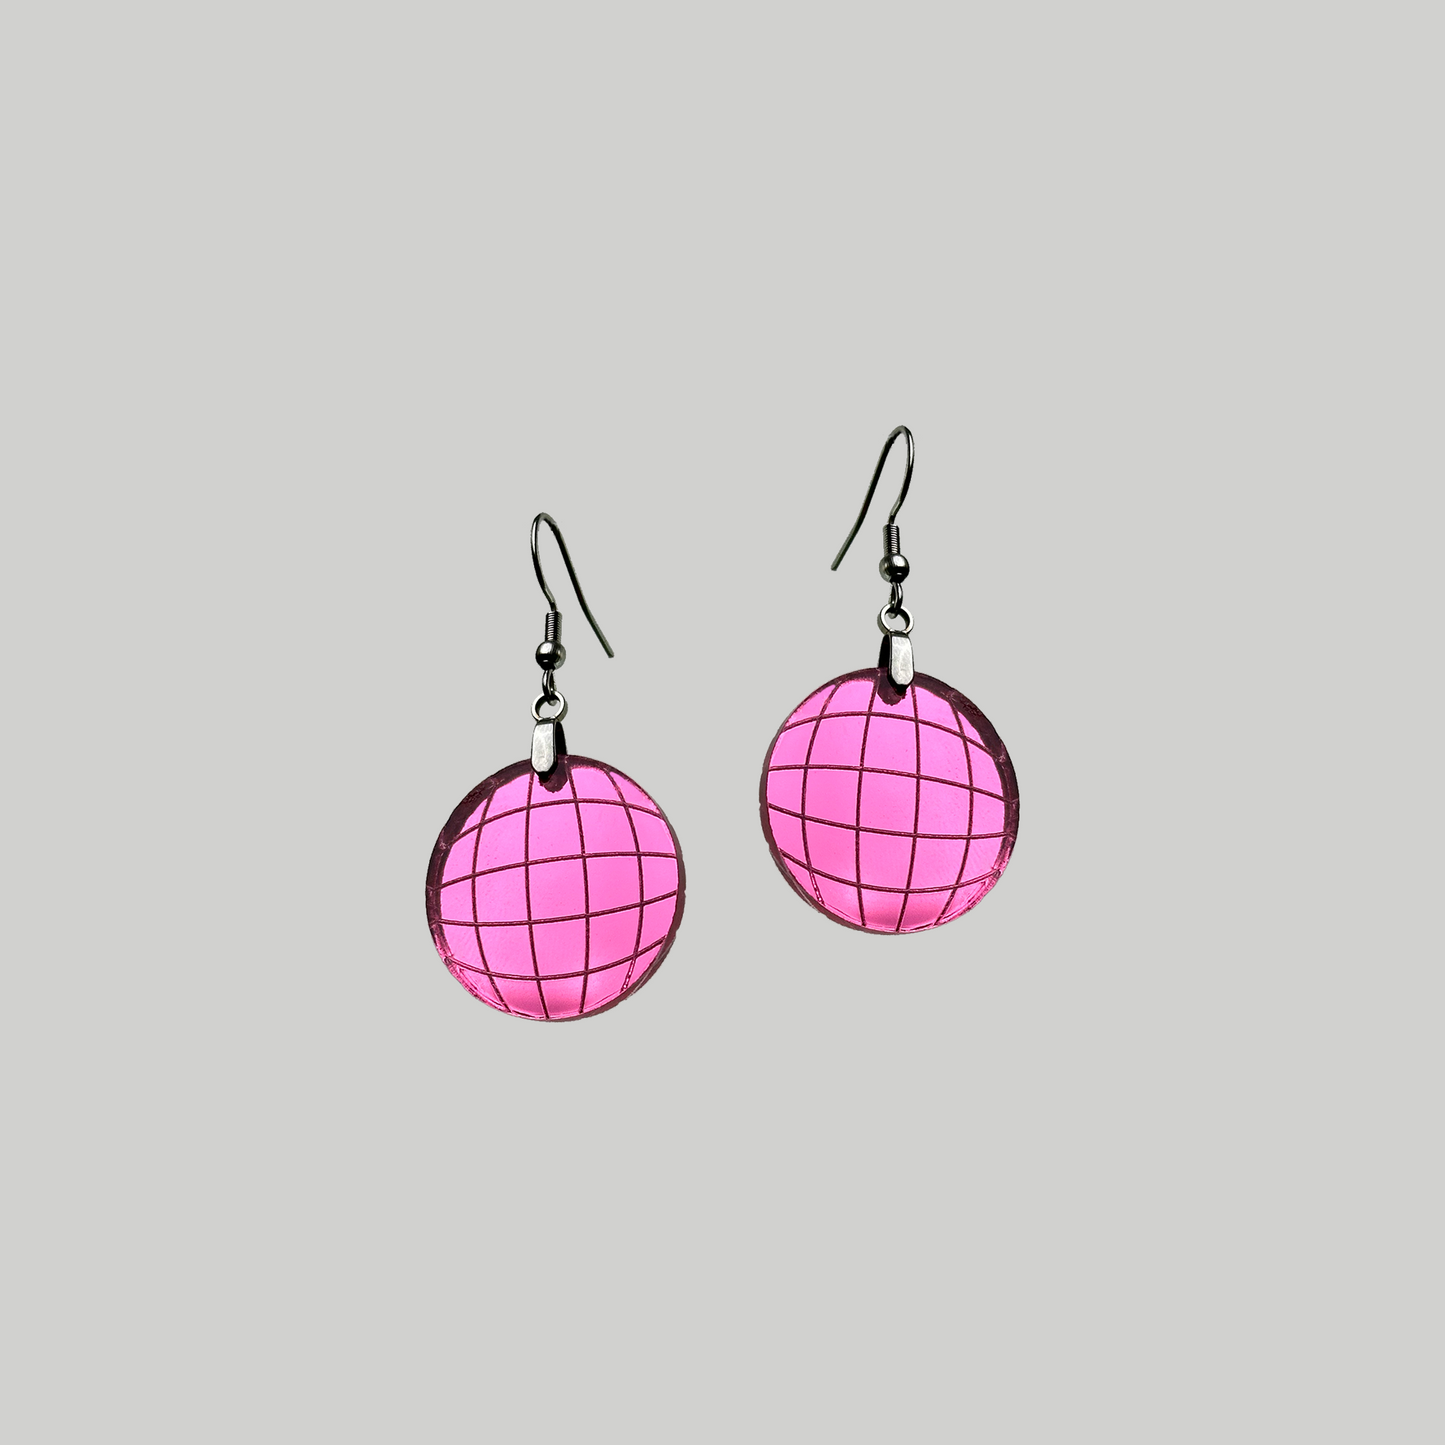 Mirrored acrylic earrings with a disco ball design, capturing attention with their shiny surface, adding a touch of dazzling allure to your ensemble.